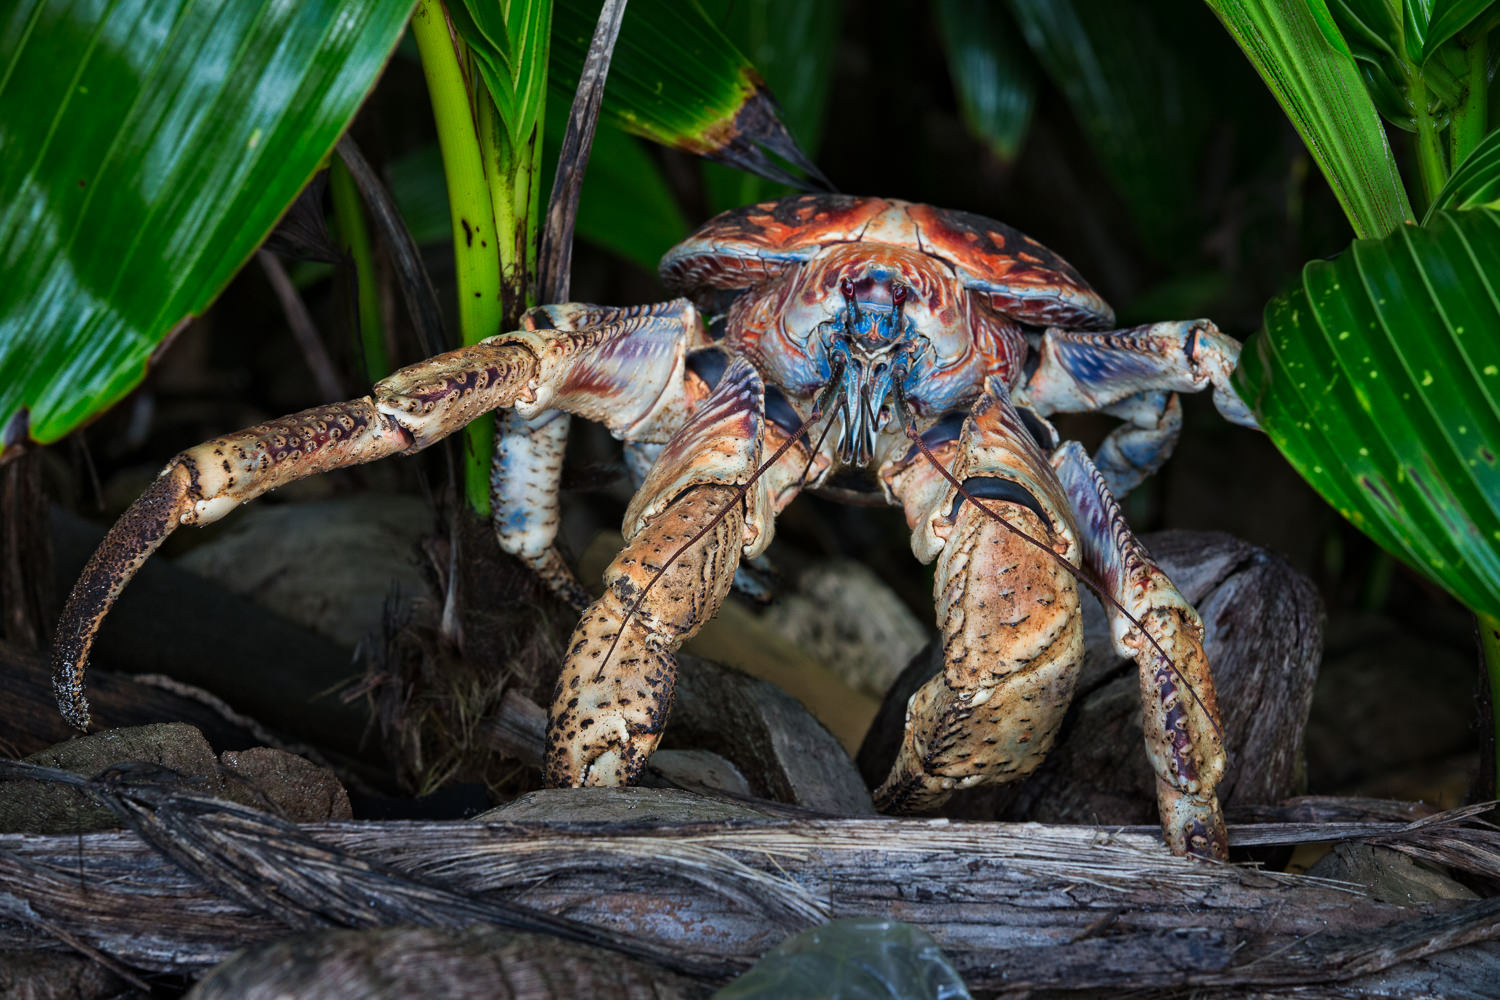 The mighty Coconut/Robber Crabs of Christmas Island